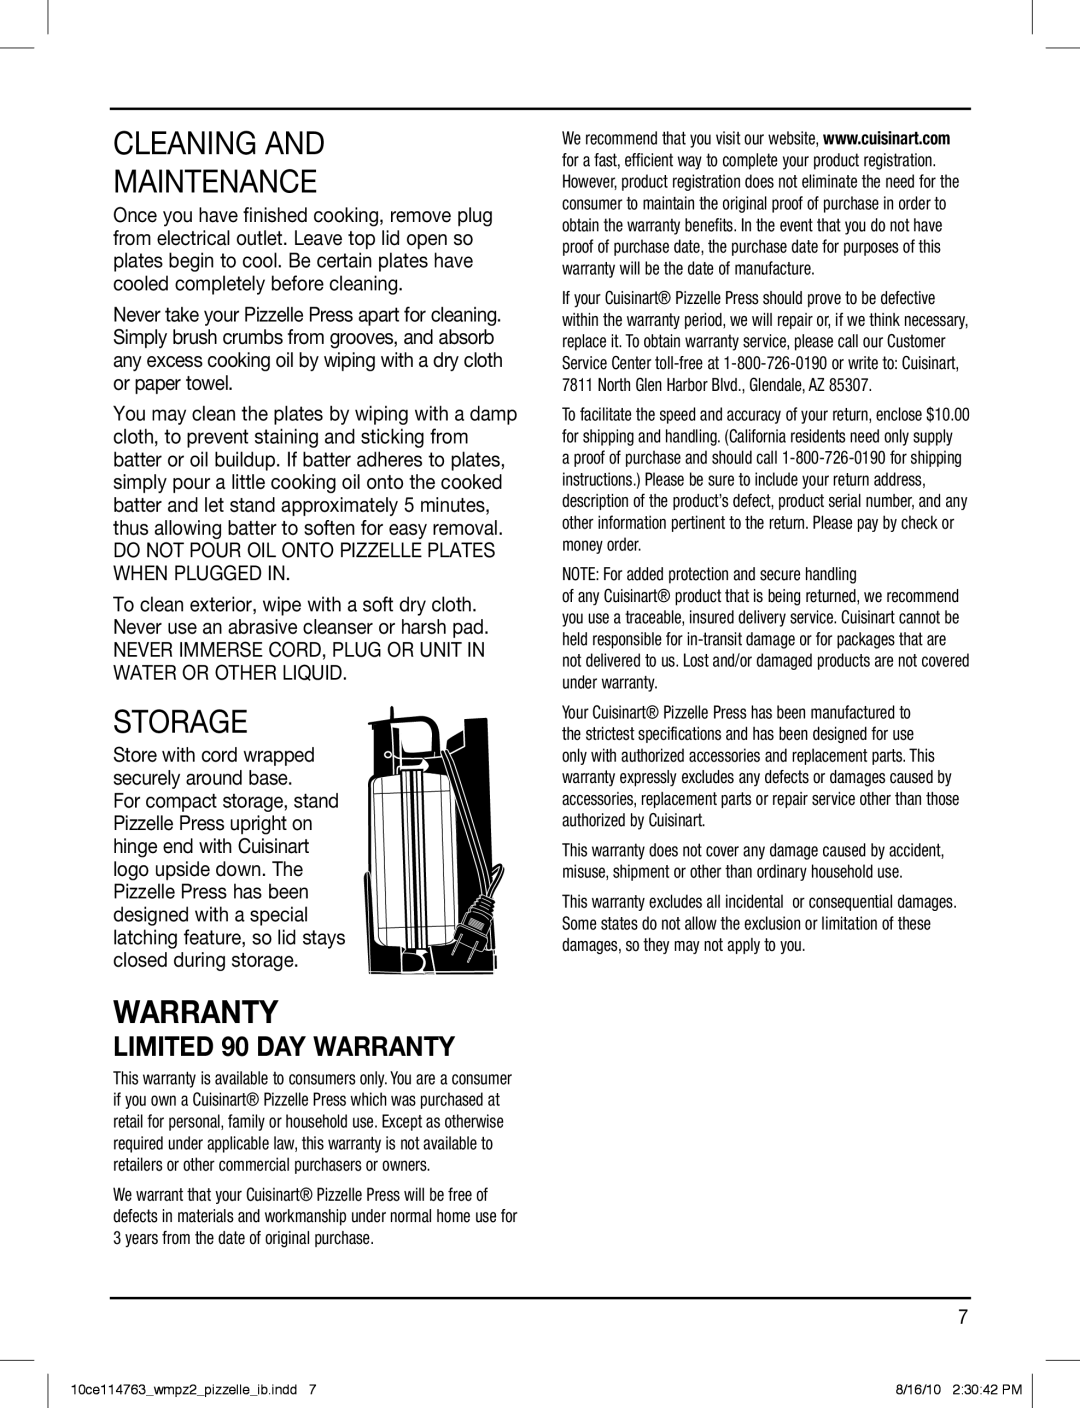 Cuisinart WM-PZ2 manual Cleaning And Maintenance, Storage, Warranty, LIMITED 90 DAY WARRANTY 